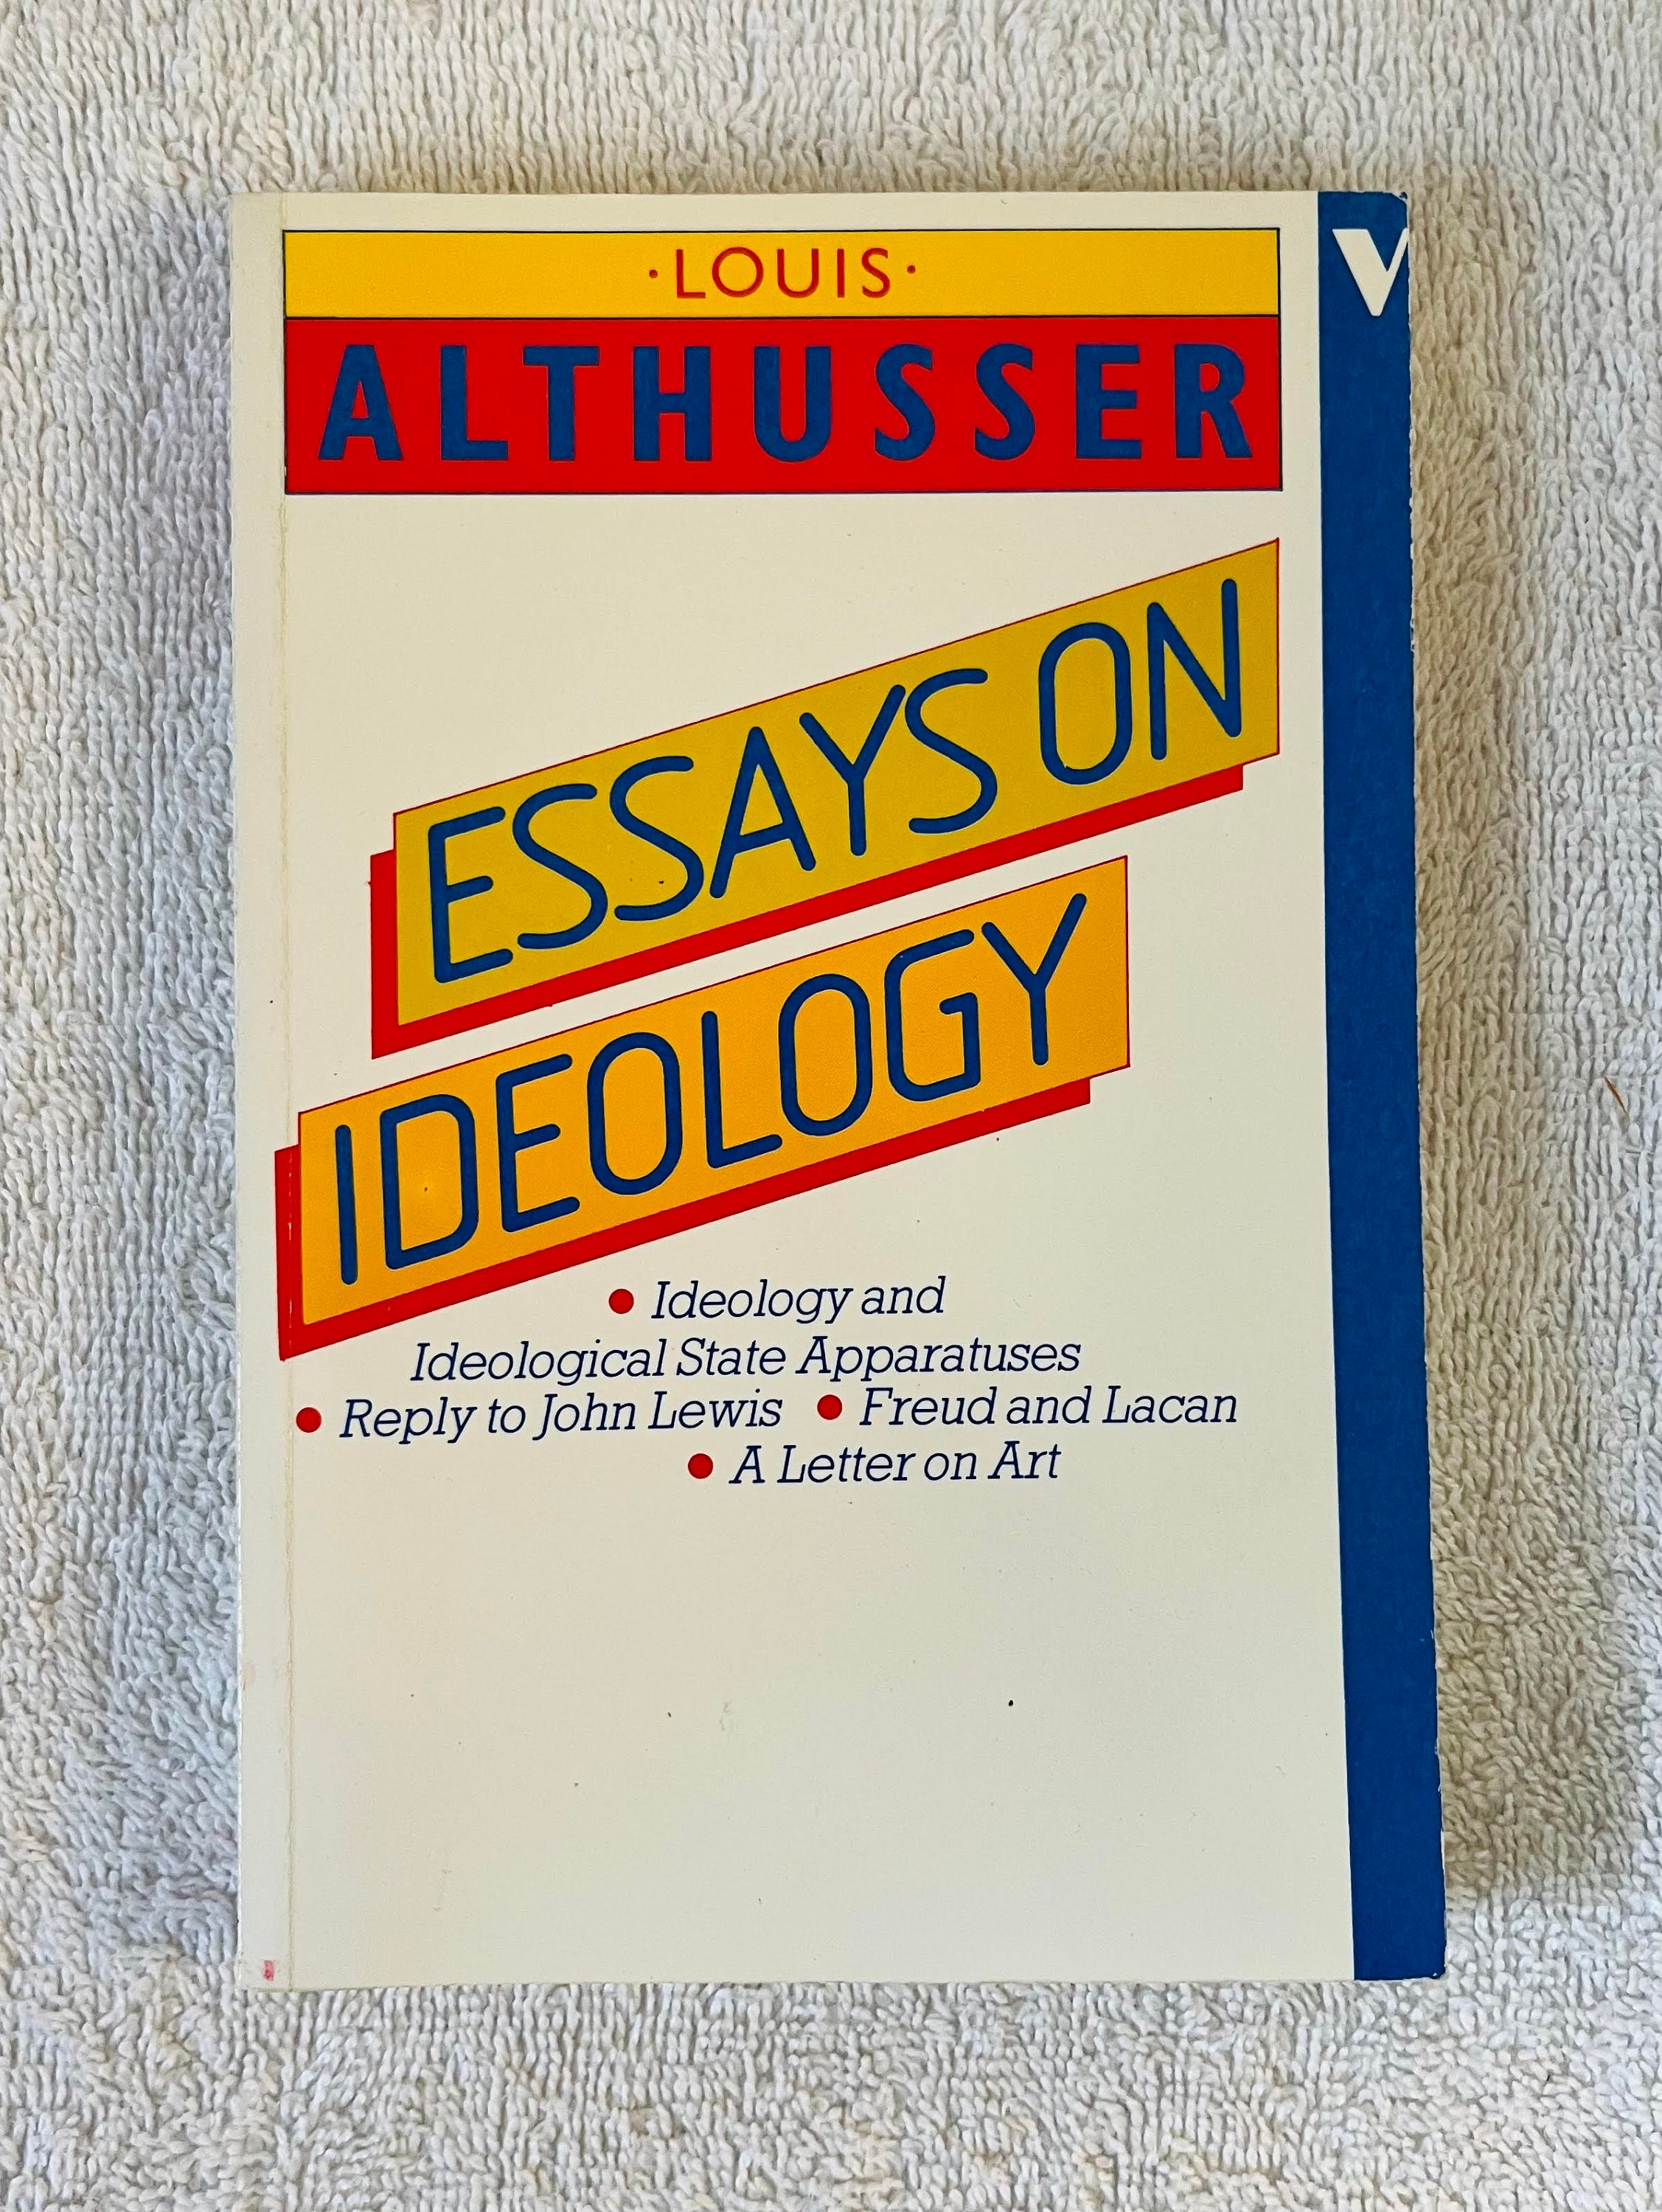 On Ideology: Buy On Ideology by Althusser Louis at Low Price in India